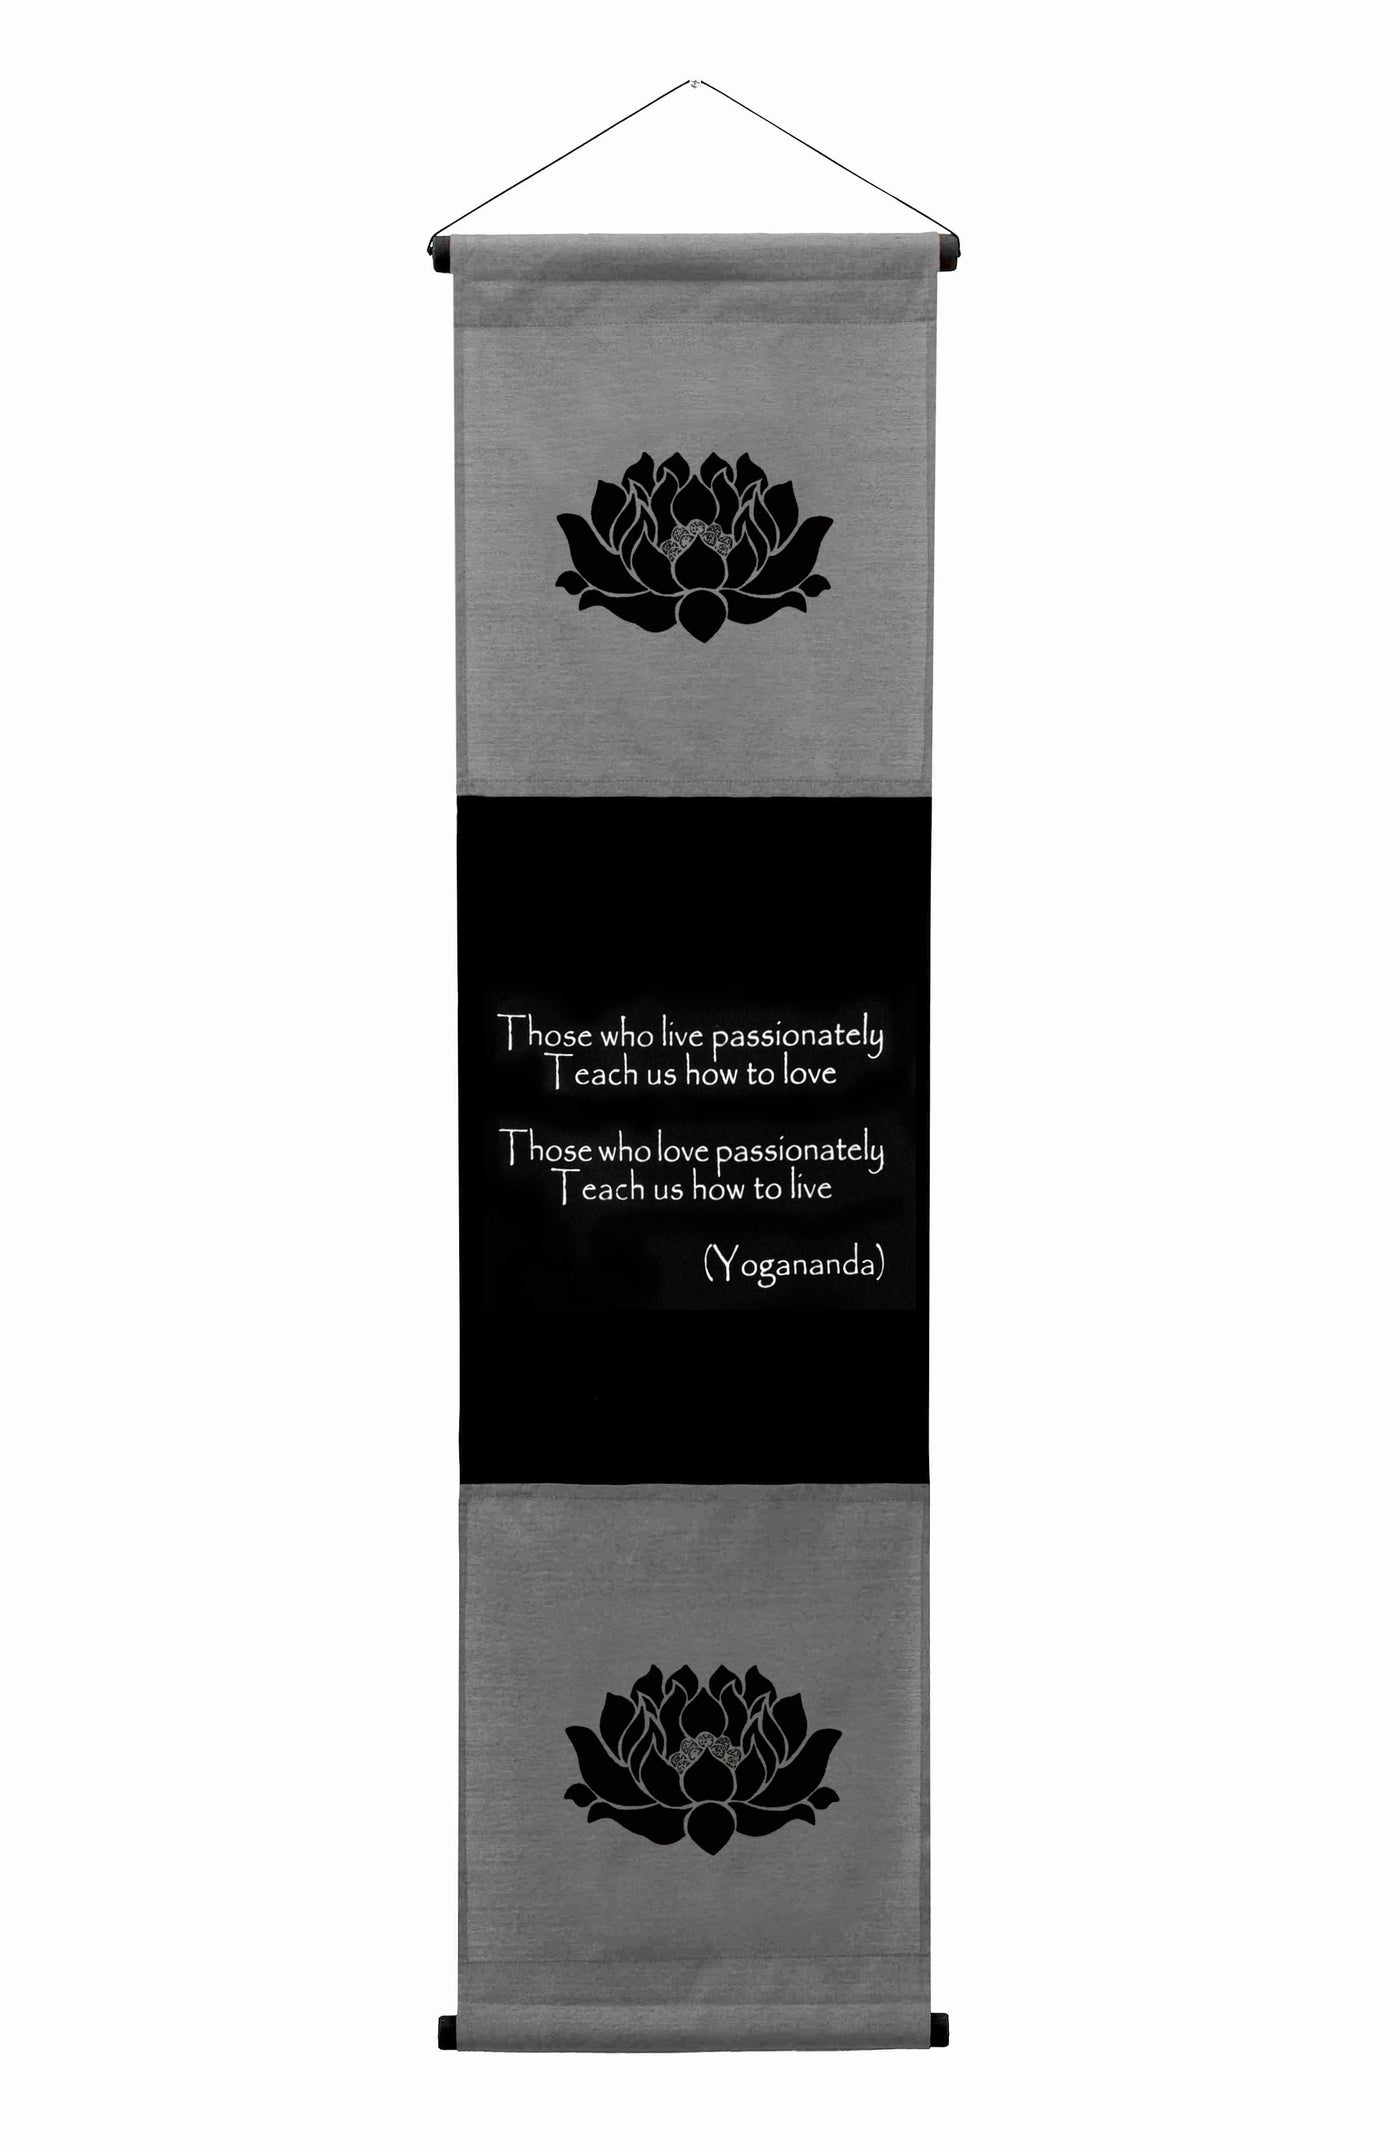 Inspirational Wall Decor Yogananda Banner Art, Inspiring Quote Hanging Scroll, Affirmation Motivational Uplifting Message, Thought Saying Tapestry